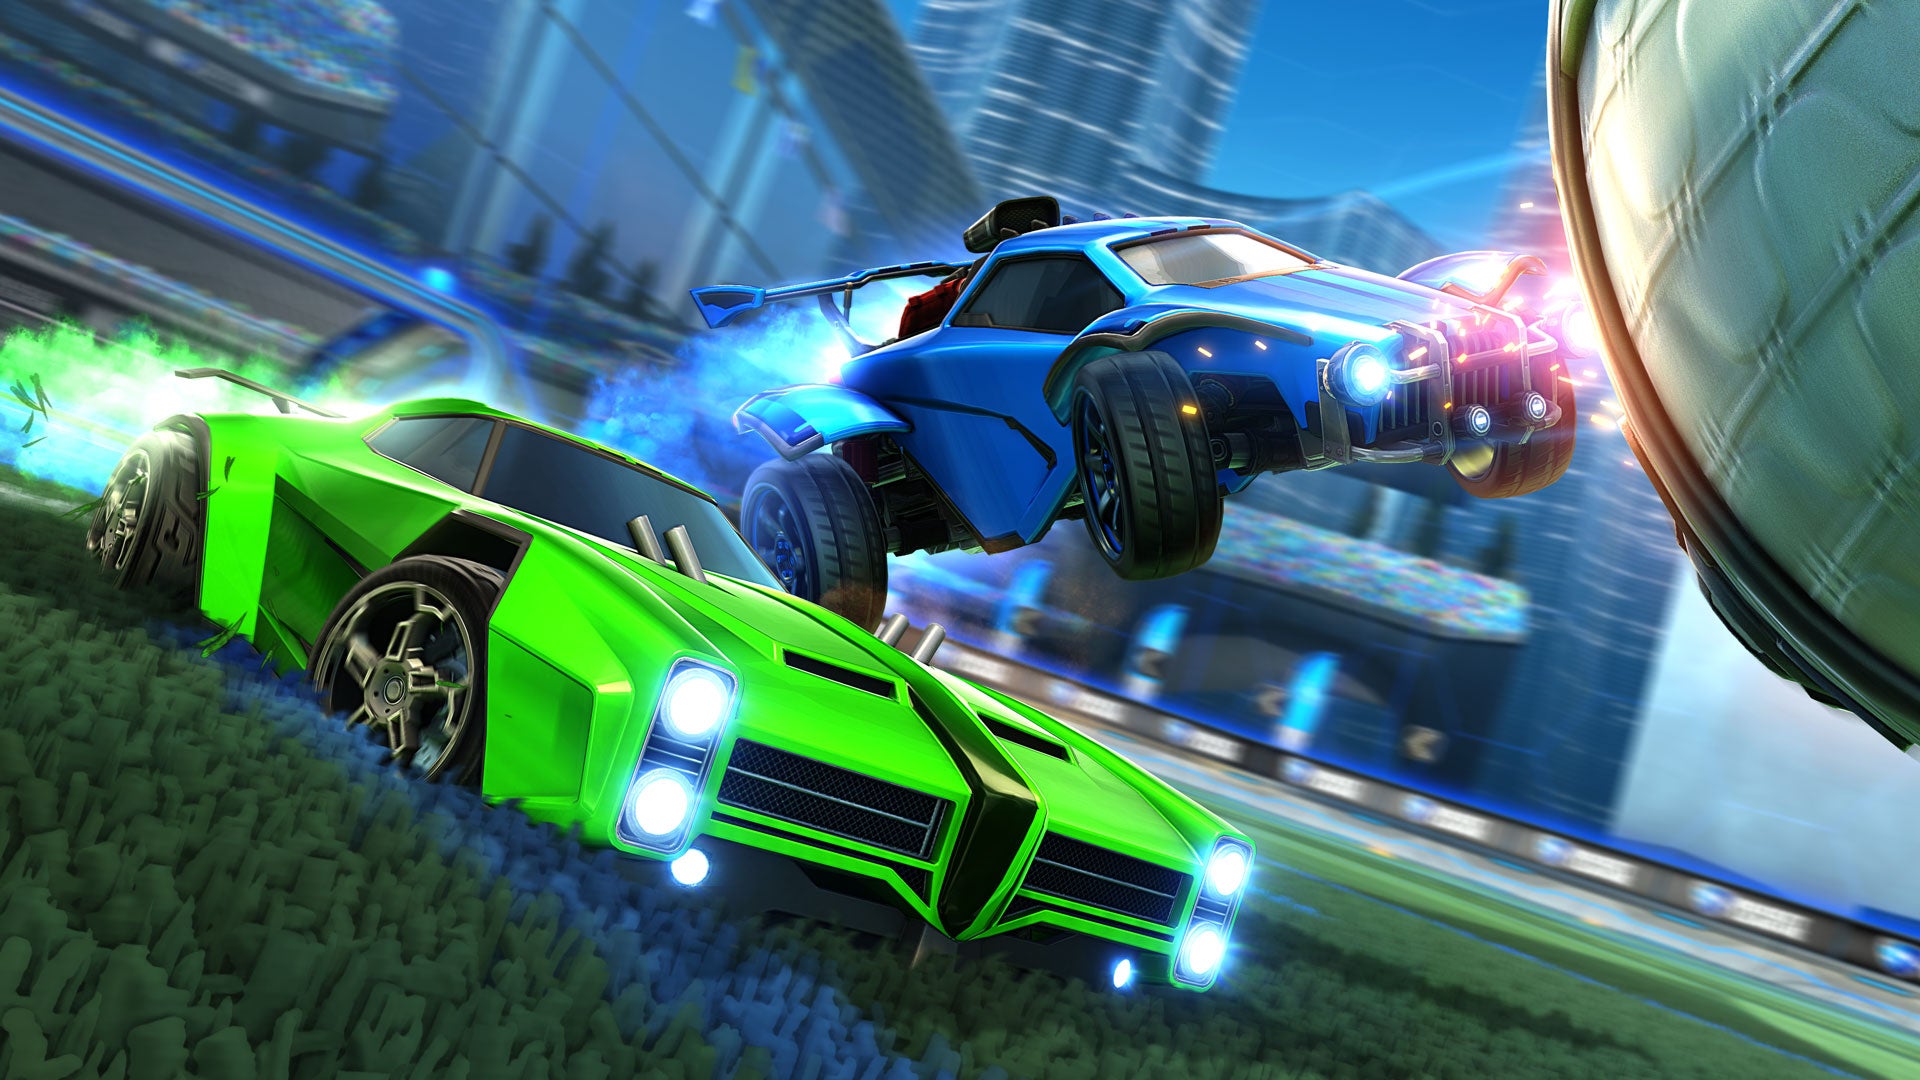 Play Rocket League on Xbox Series X, Series S, and PlayStation 5 Image